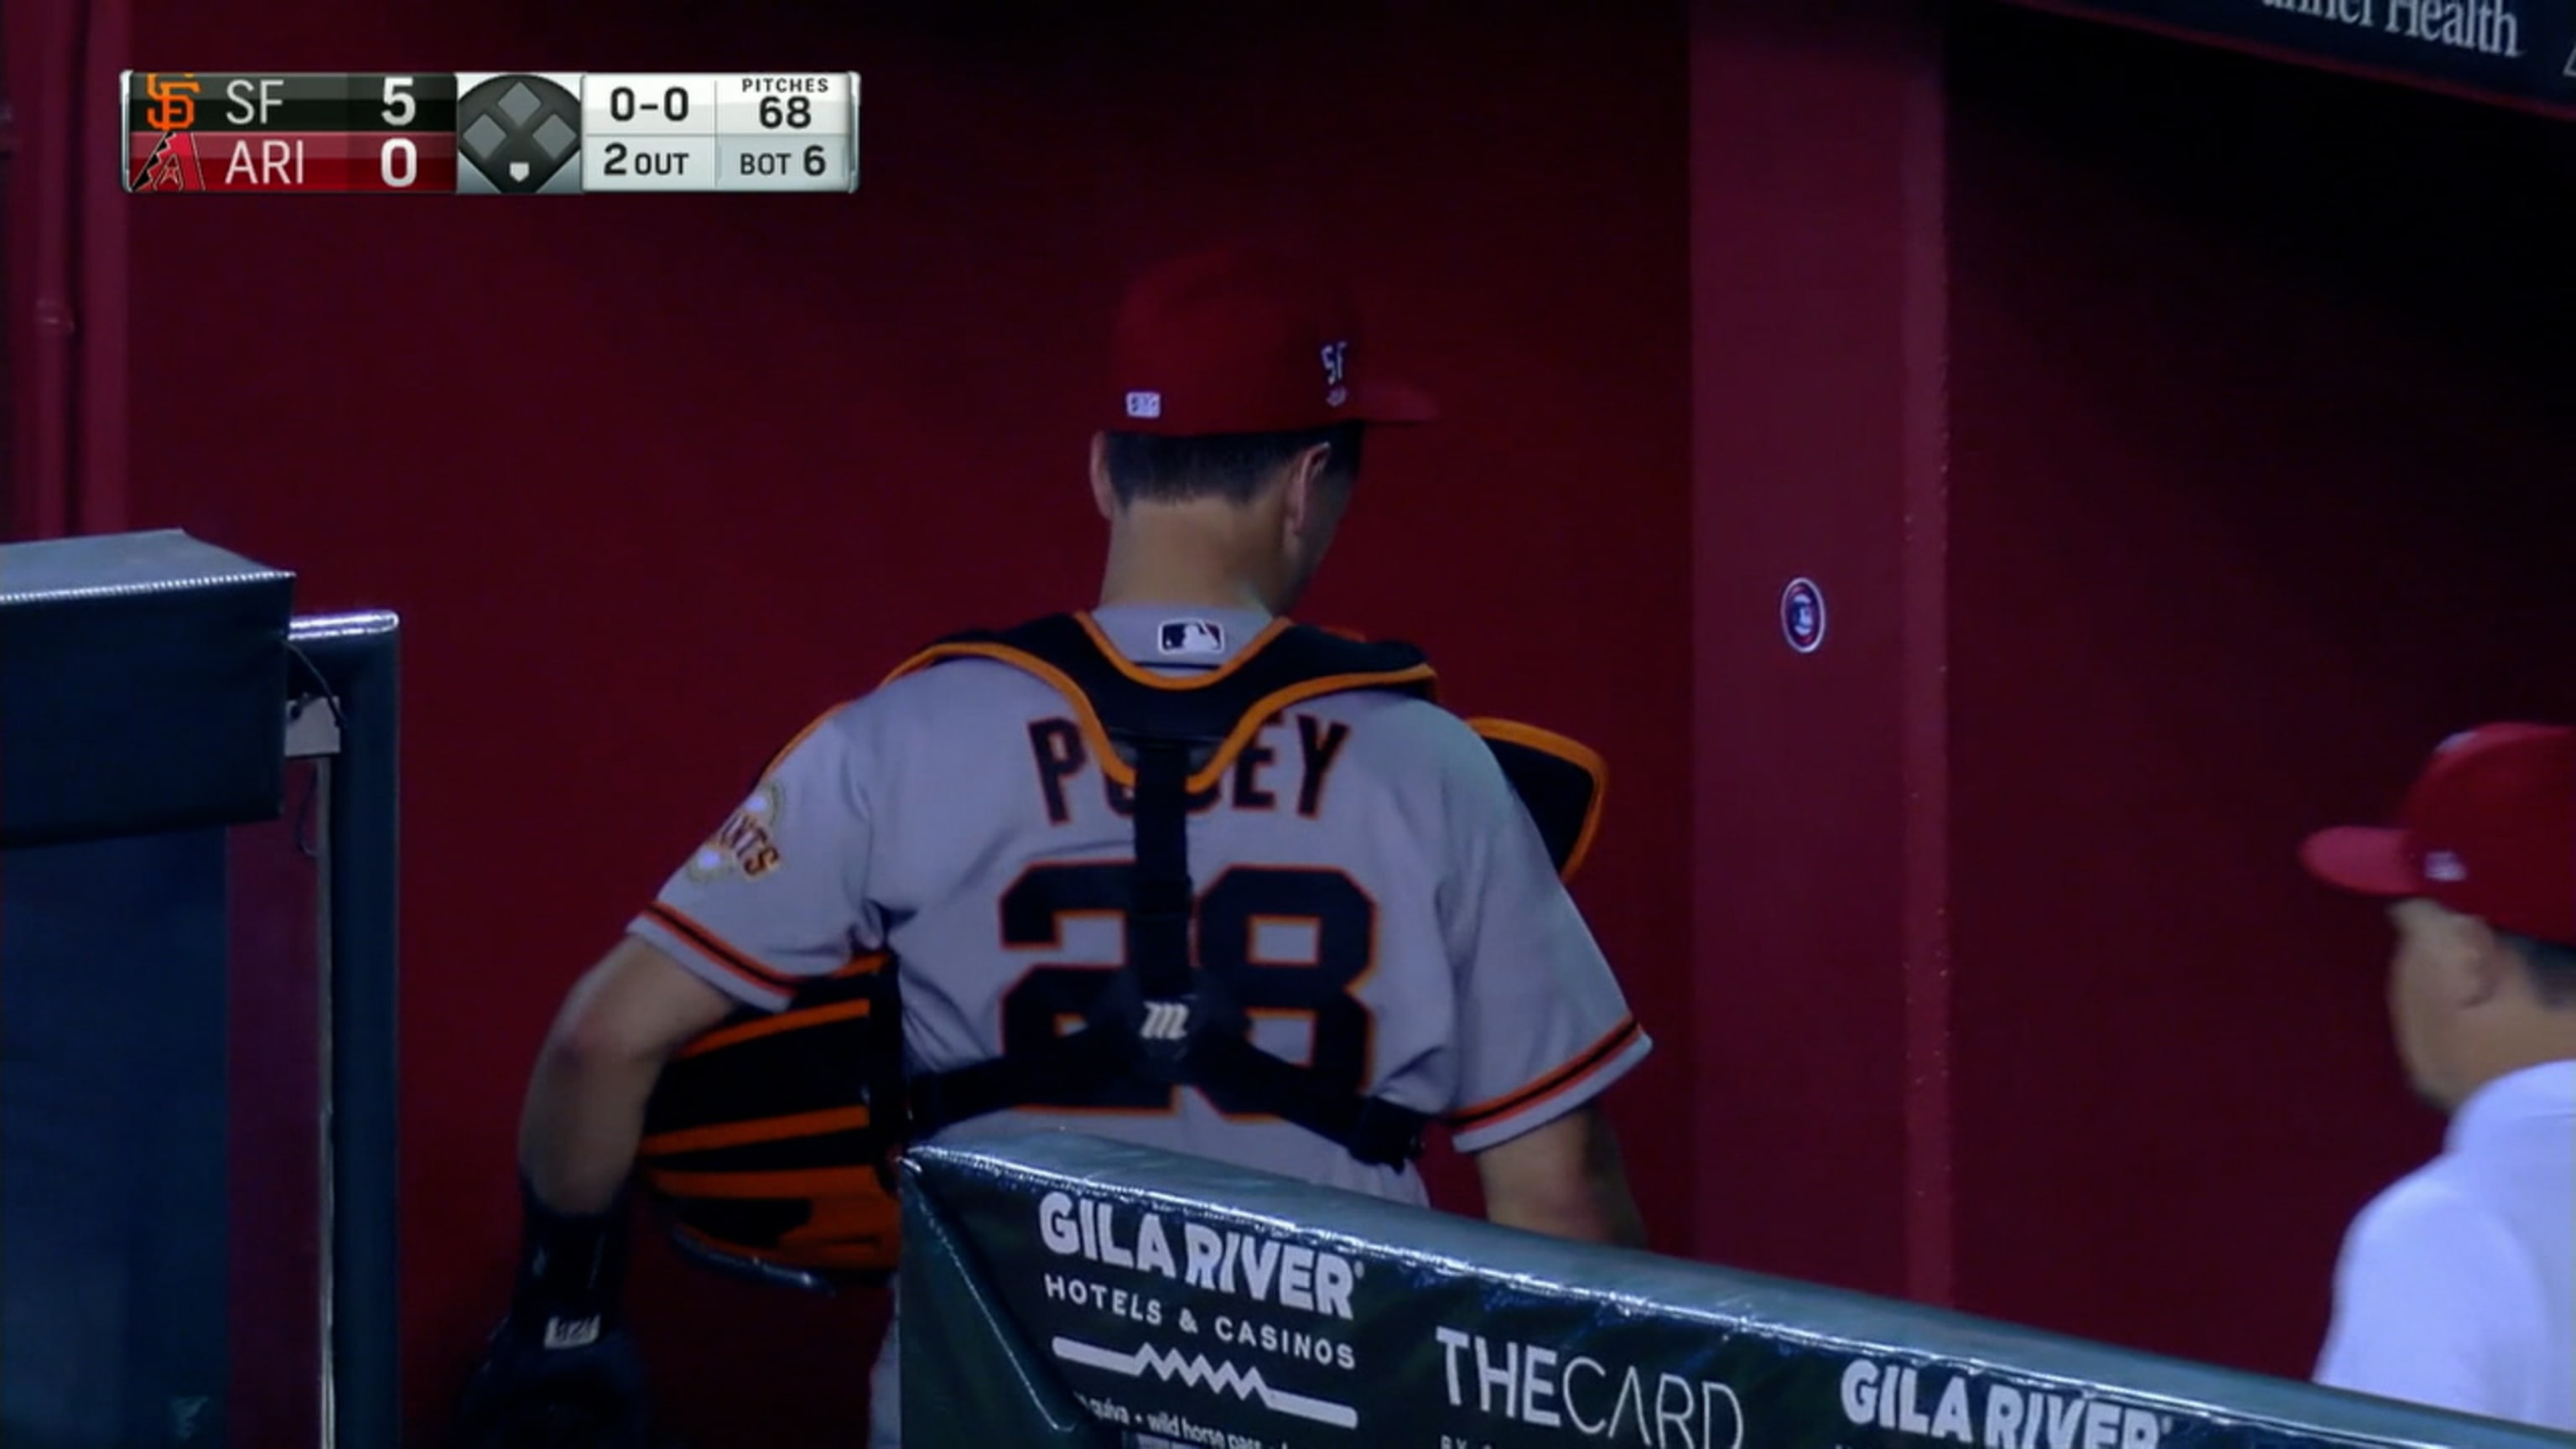 3 San Francisco Giants players join Buster Posey on 2015 National